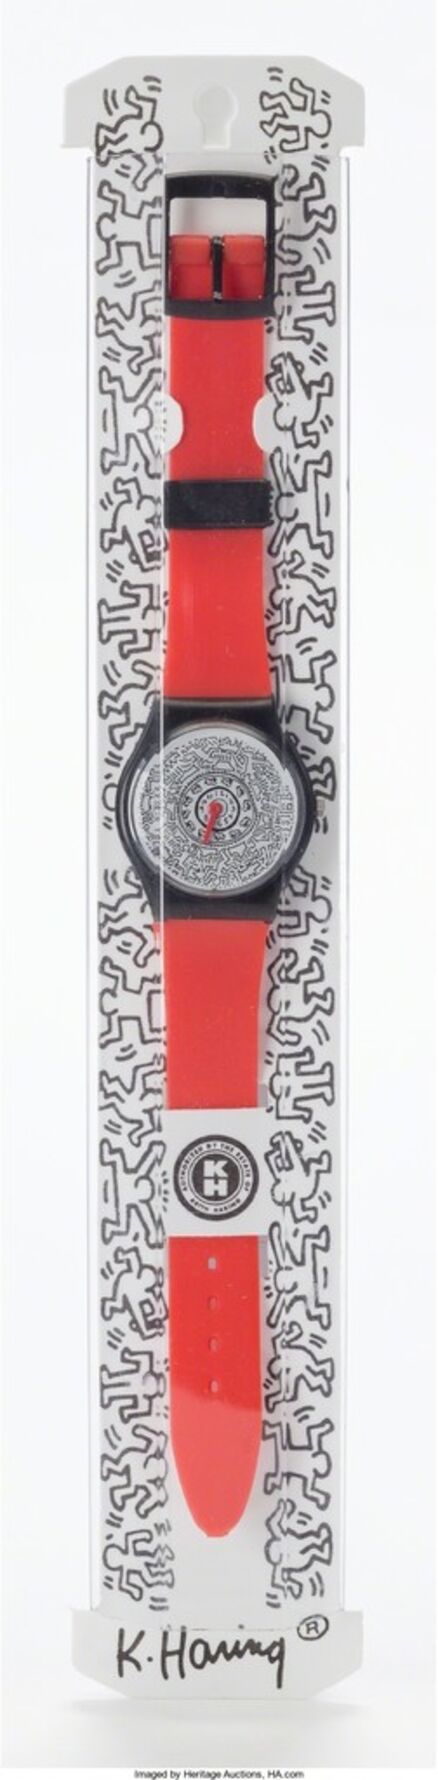 Keith Haring, ‘Swatch’